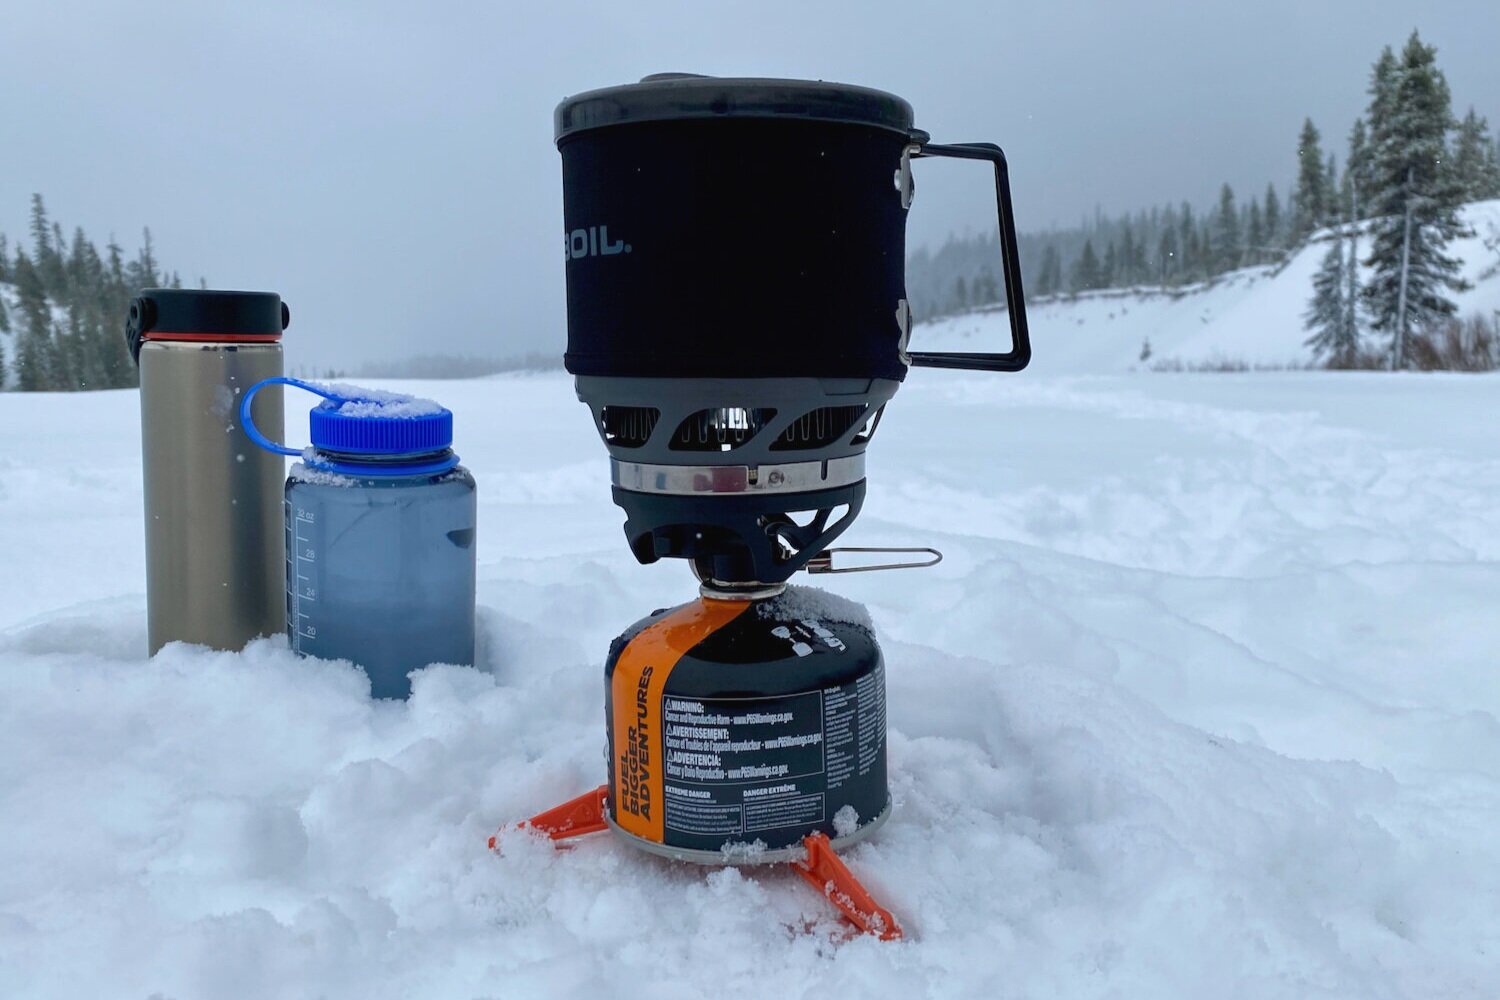 A Nalgene bottle makes an excellent space heater for your sleeping bag.